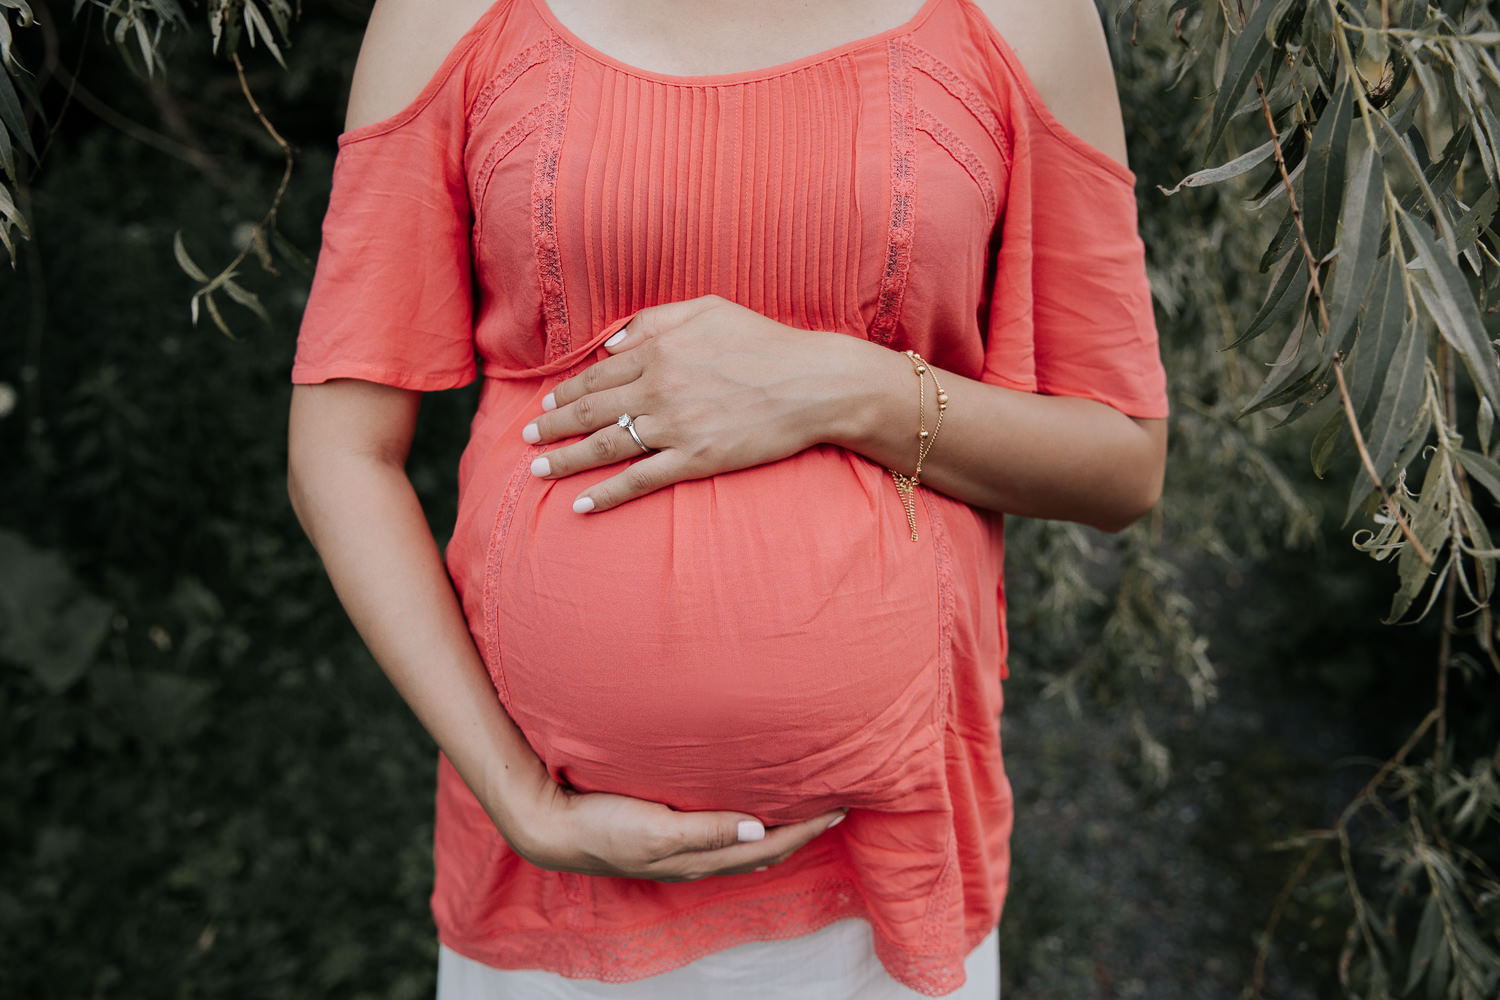 pregnant woman in flowing coral top standing in front of willow tree holding baby belly - Markham Lifestyle Photos